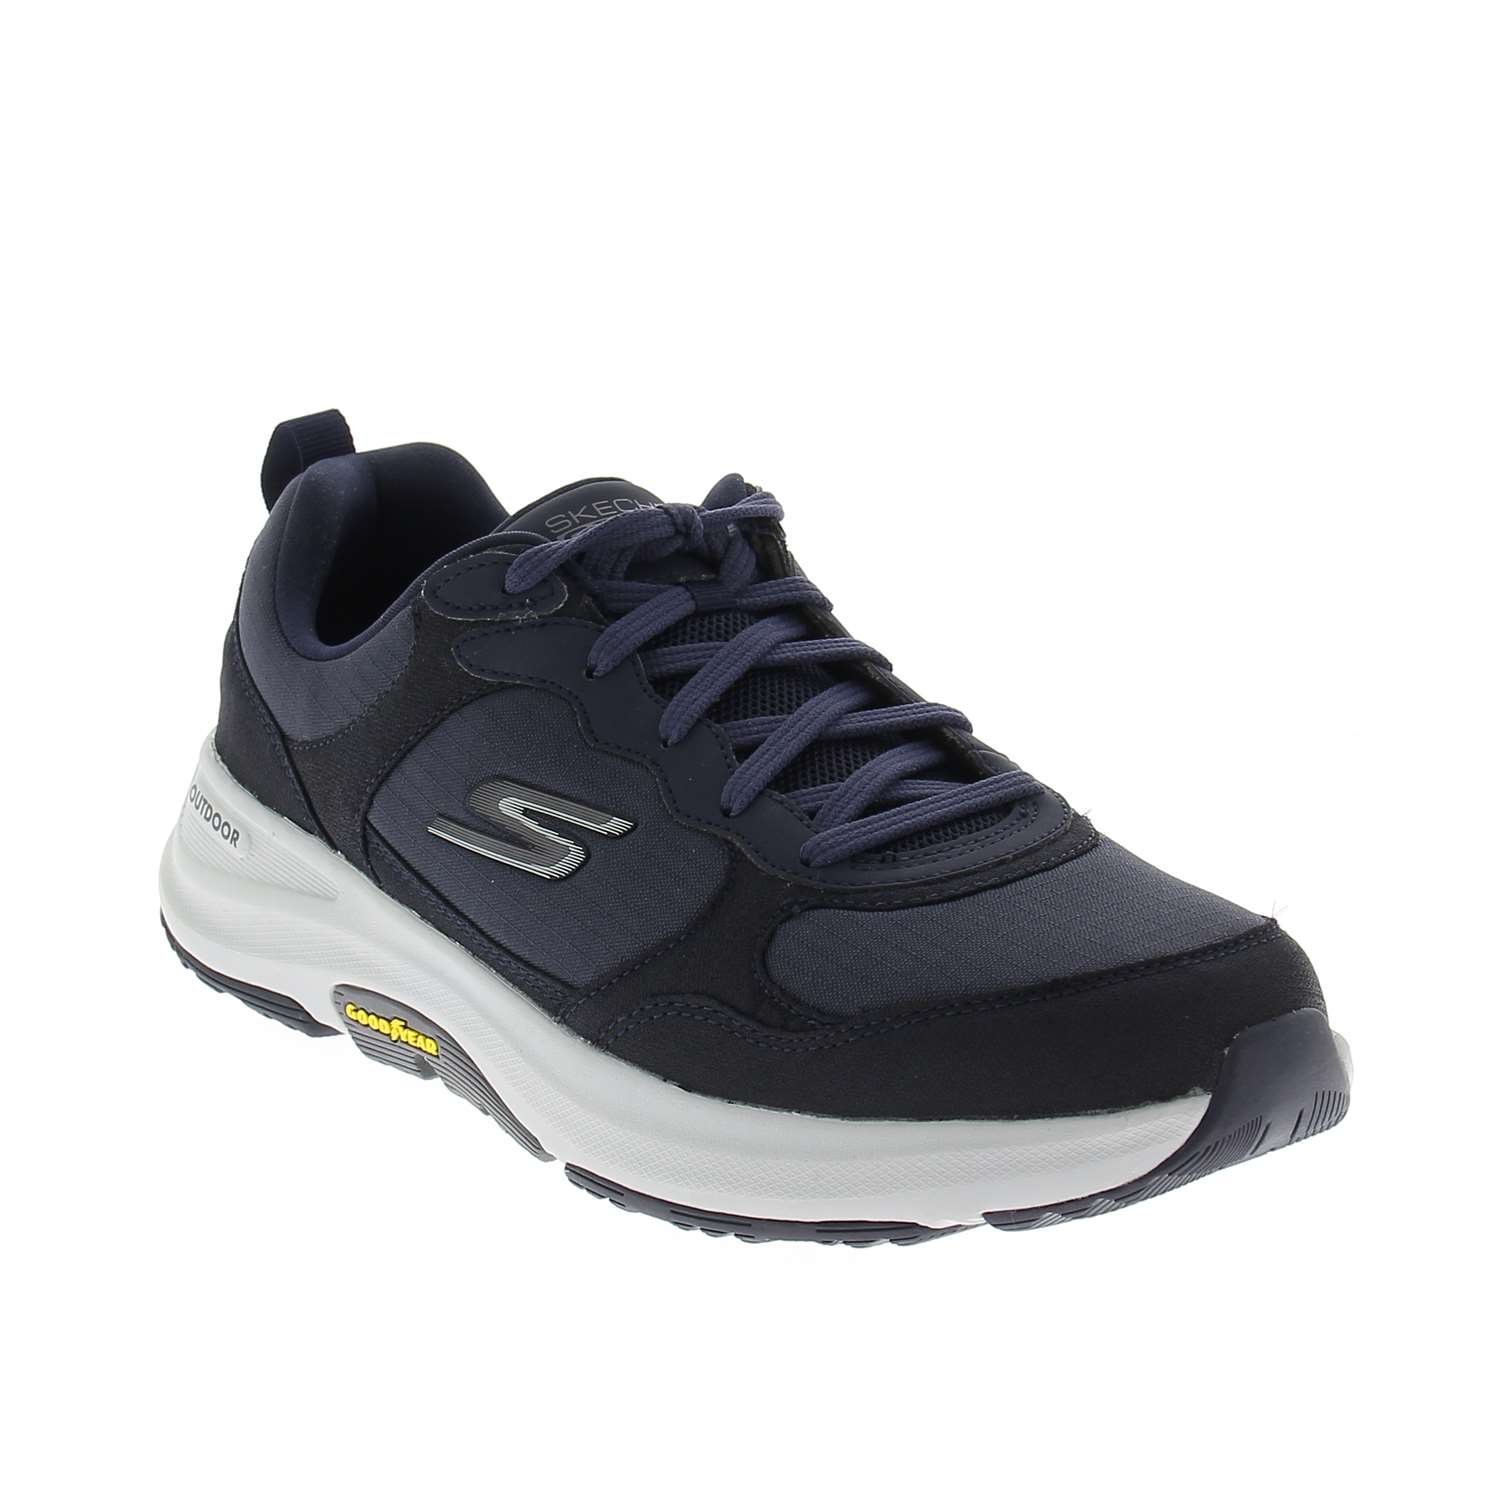 01 - GO WALK OUTDOOR - SKECHERS - Chaussures à lacets - Synthétique